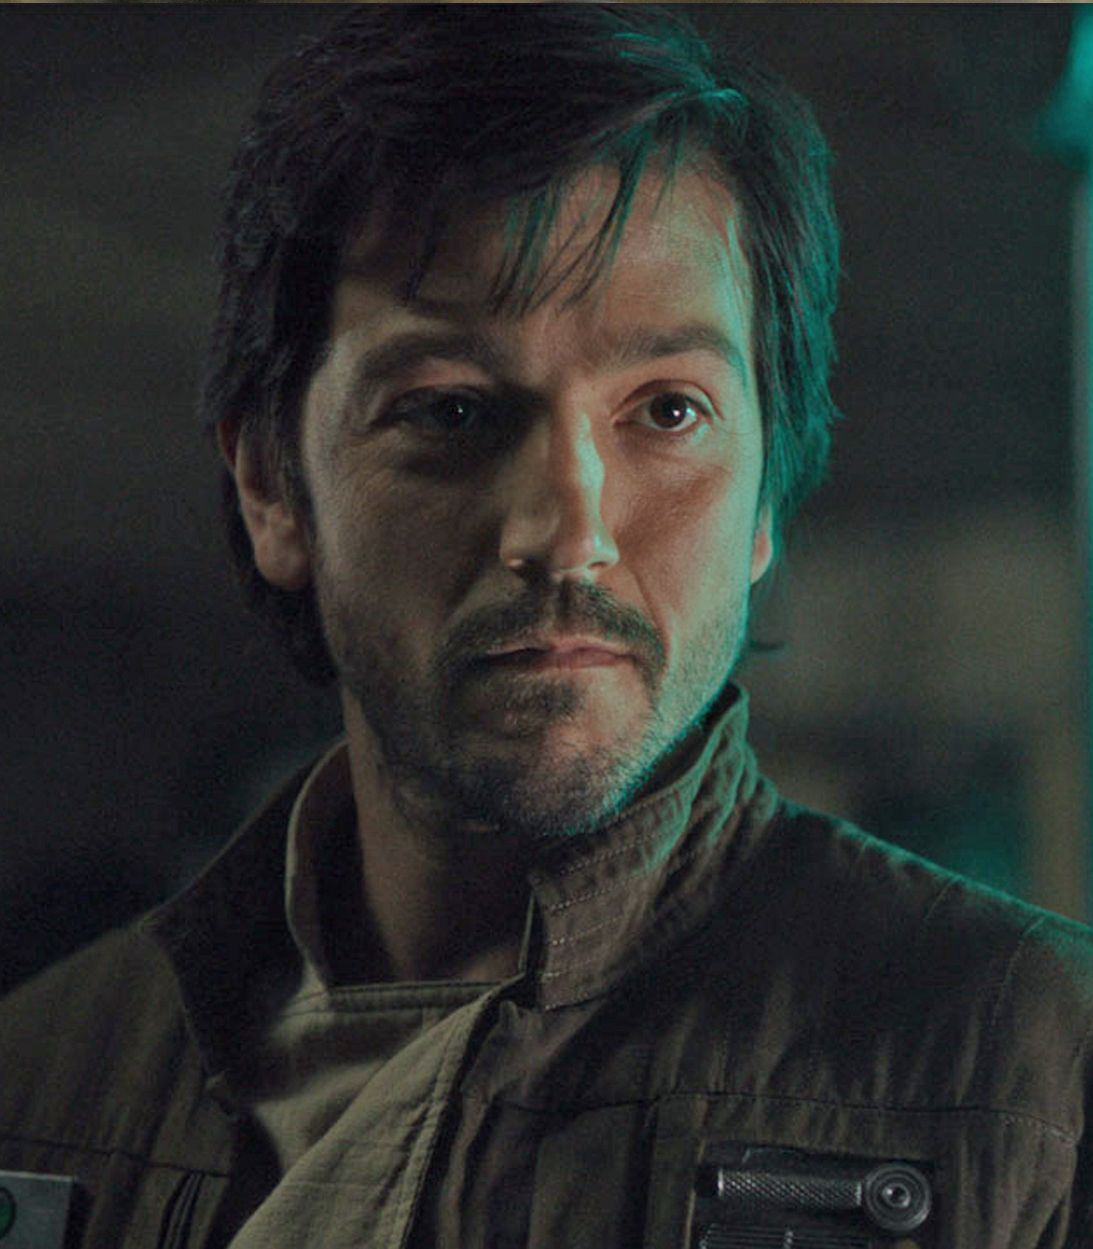 Diego Luna as Cassian Andor in Rogue One Star Wars